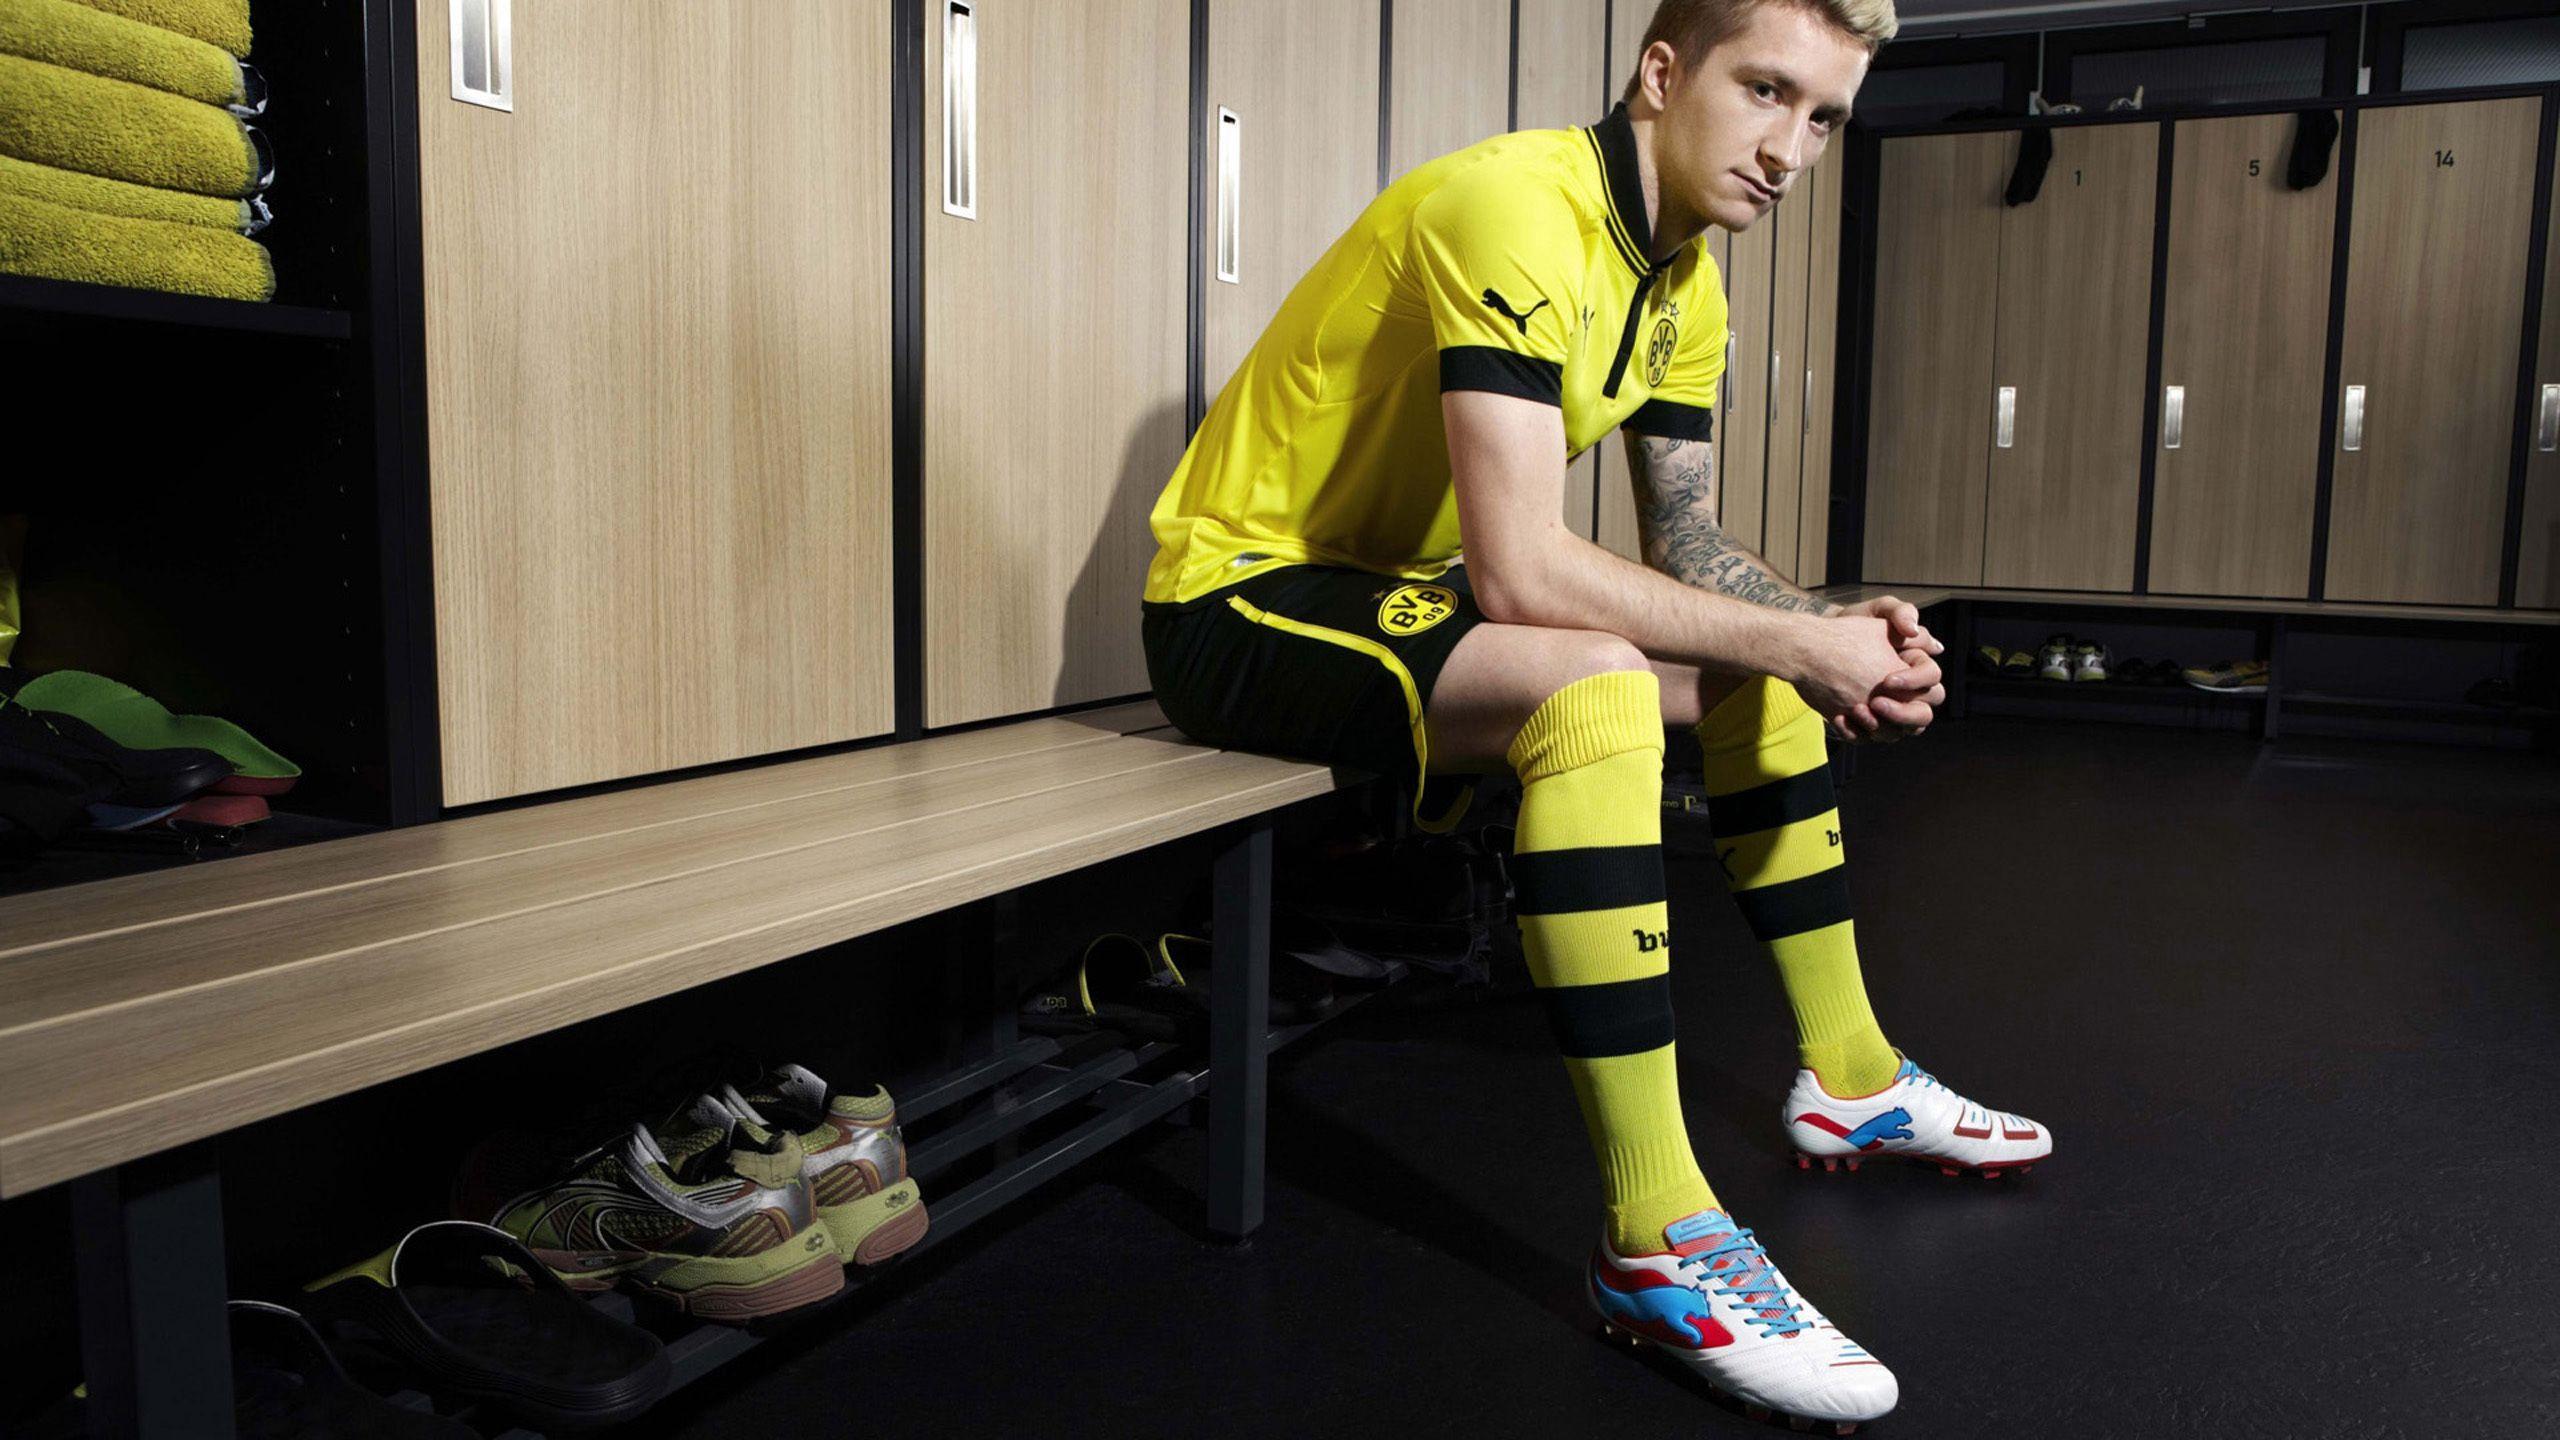 Marco Reus Wallpaper Image Photo Picture Background